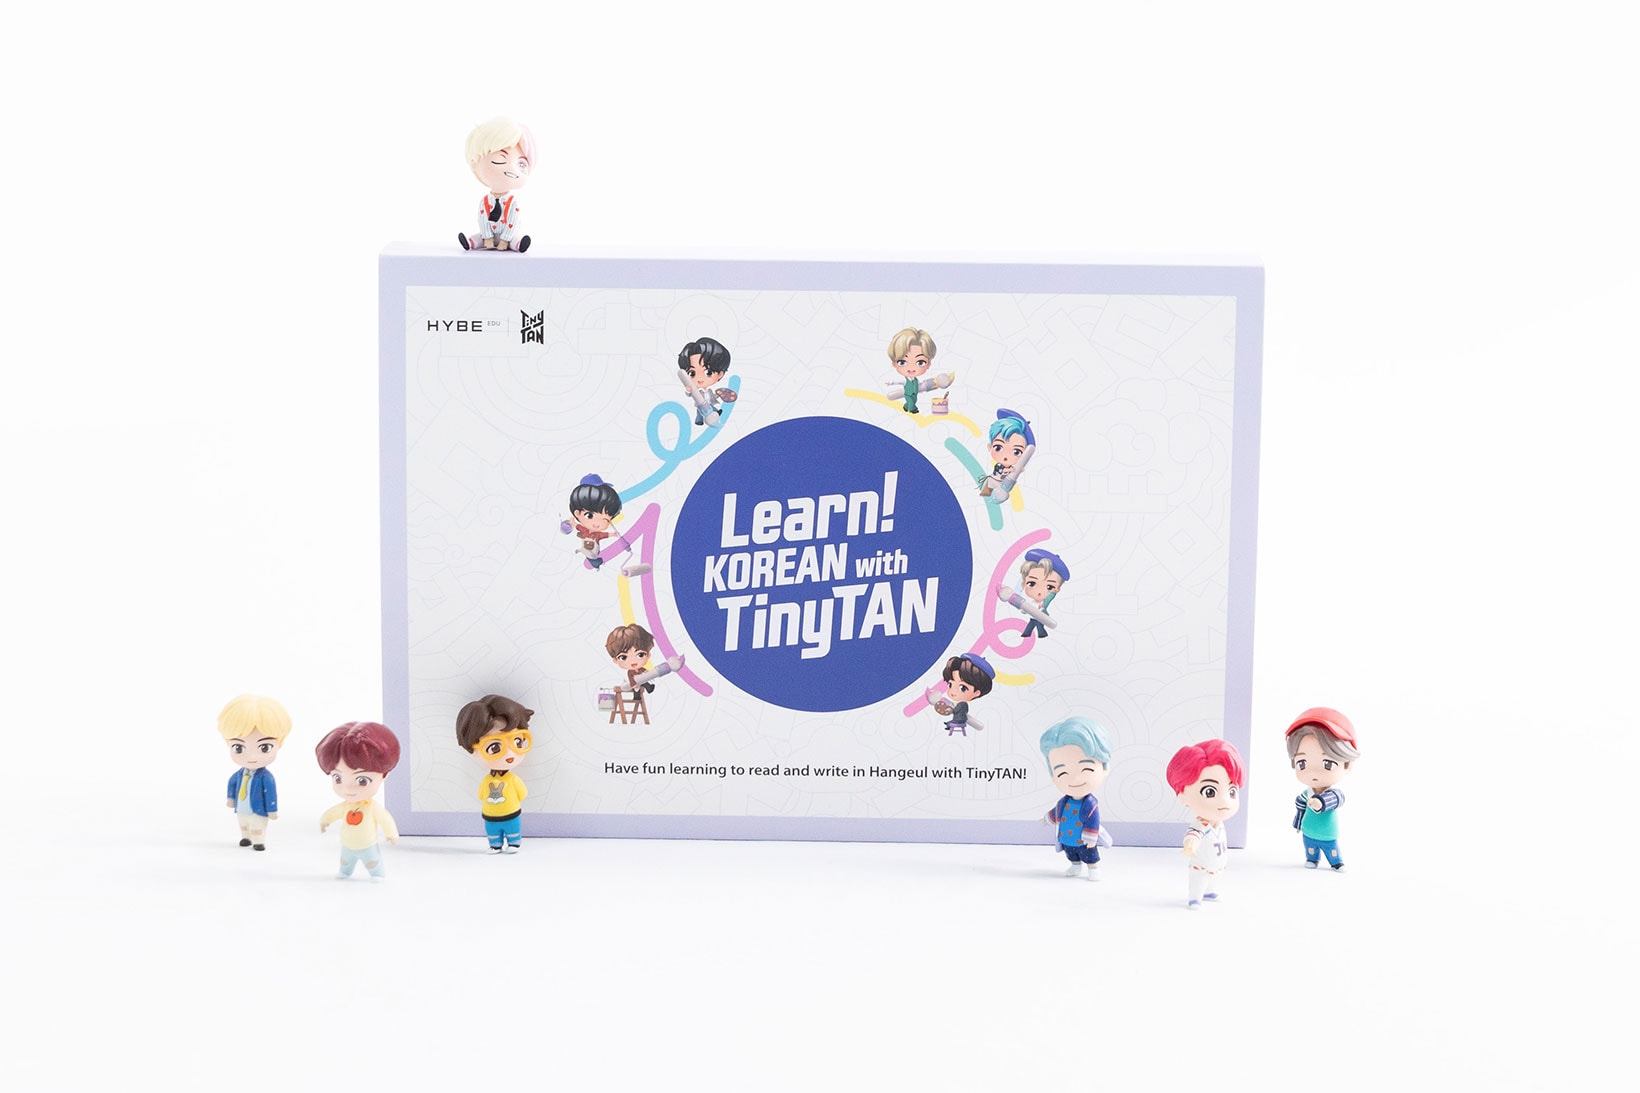 bts hybe learn korean with tinytan set kit box packaging characters